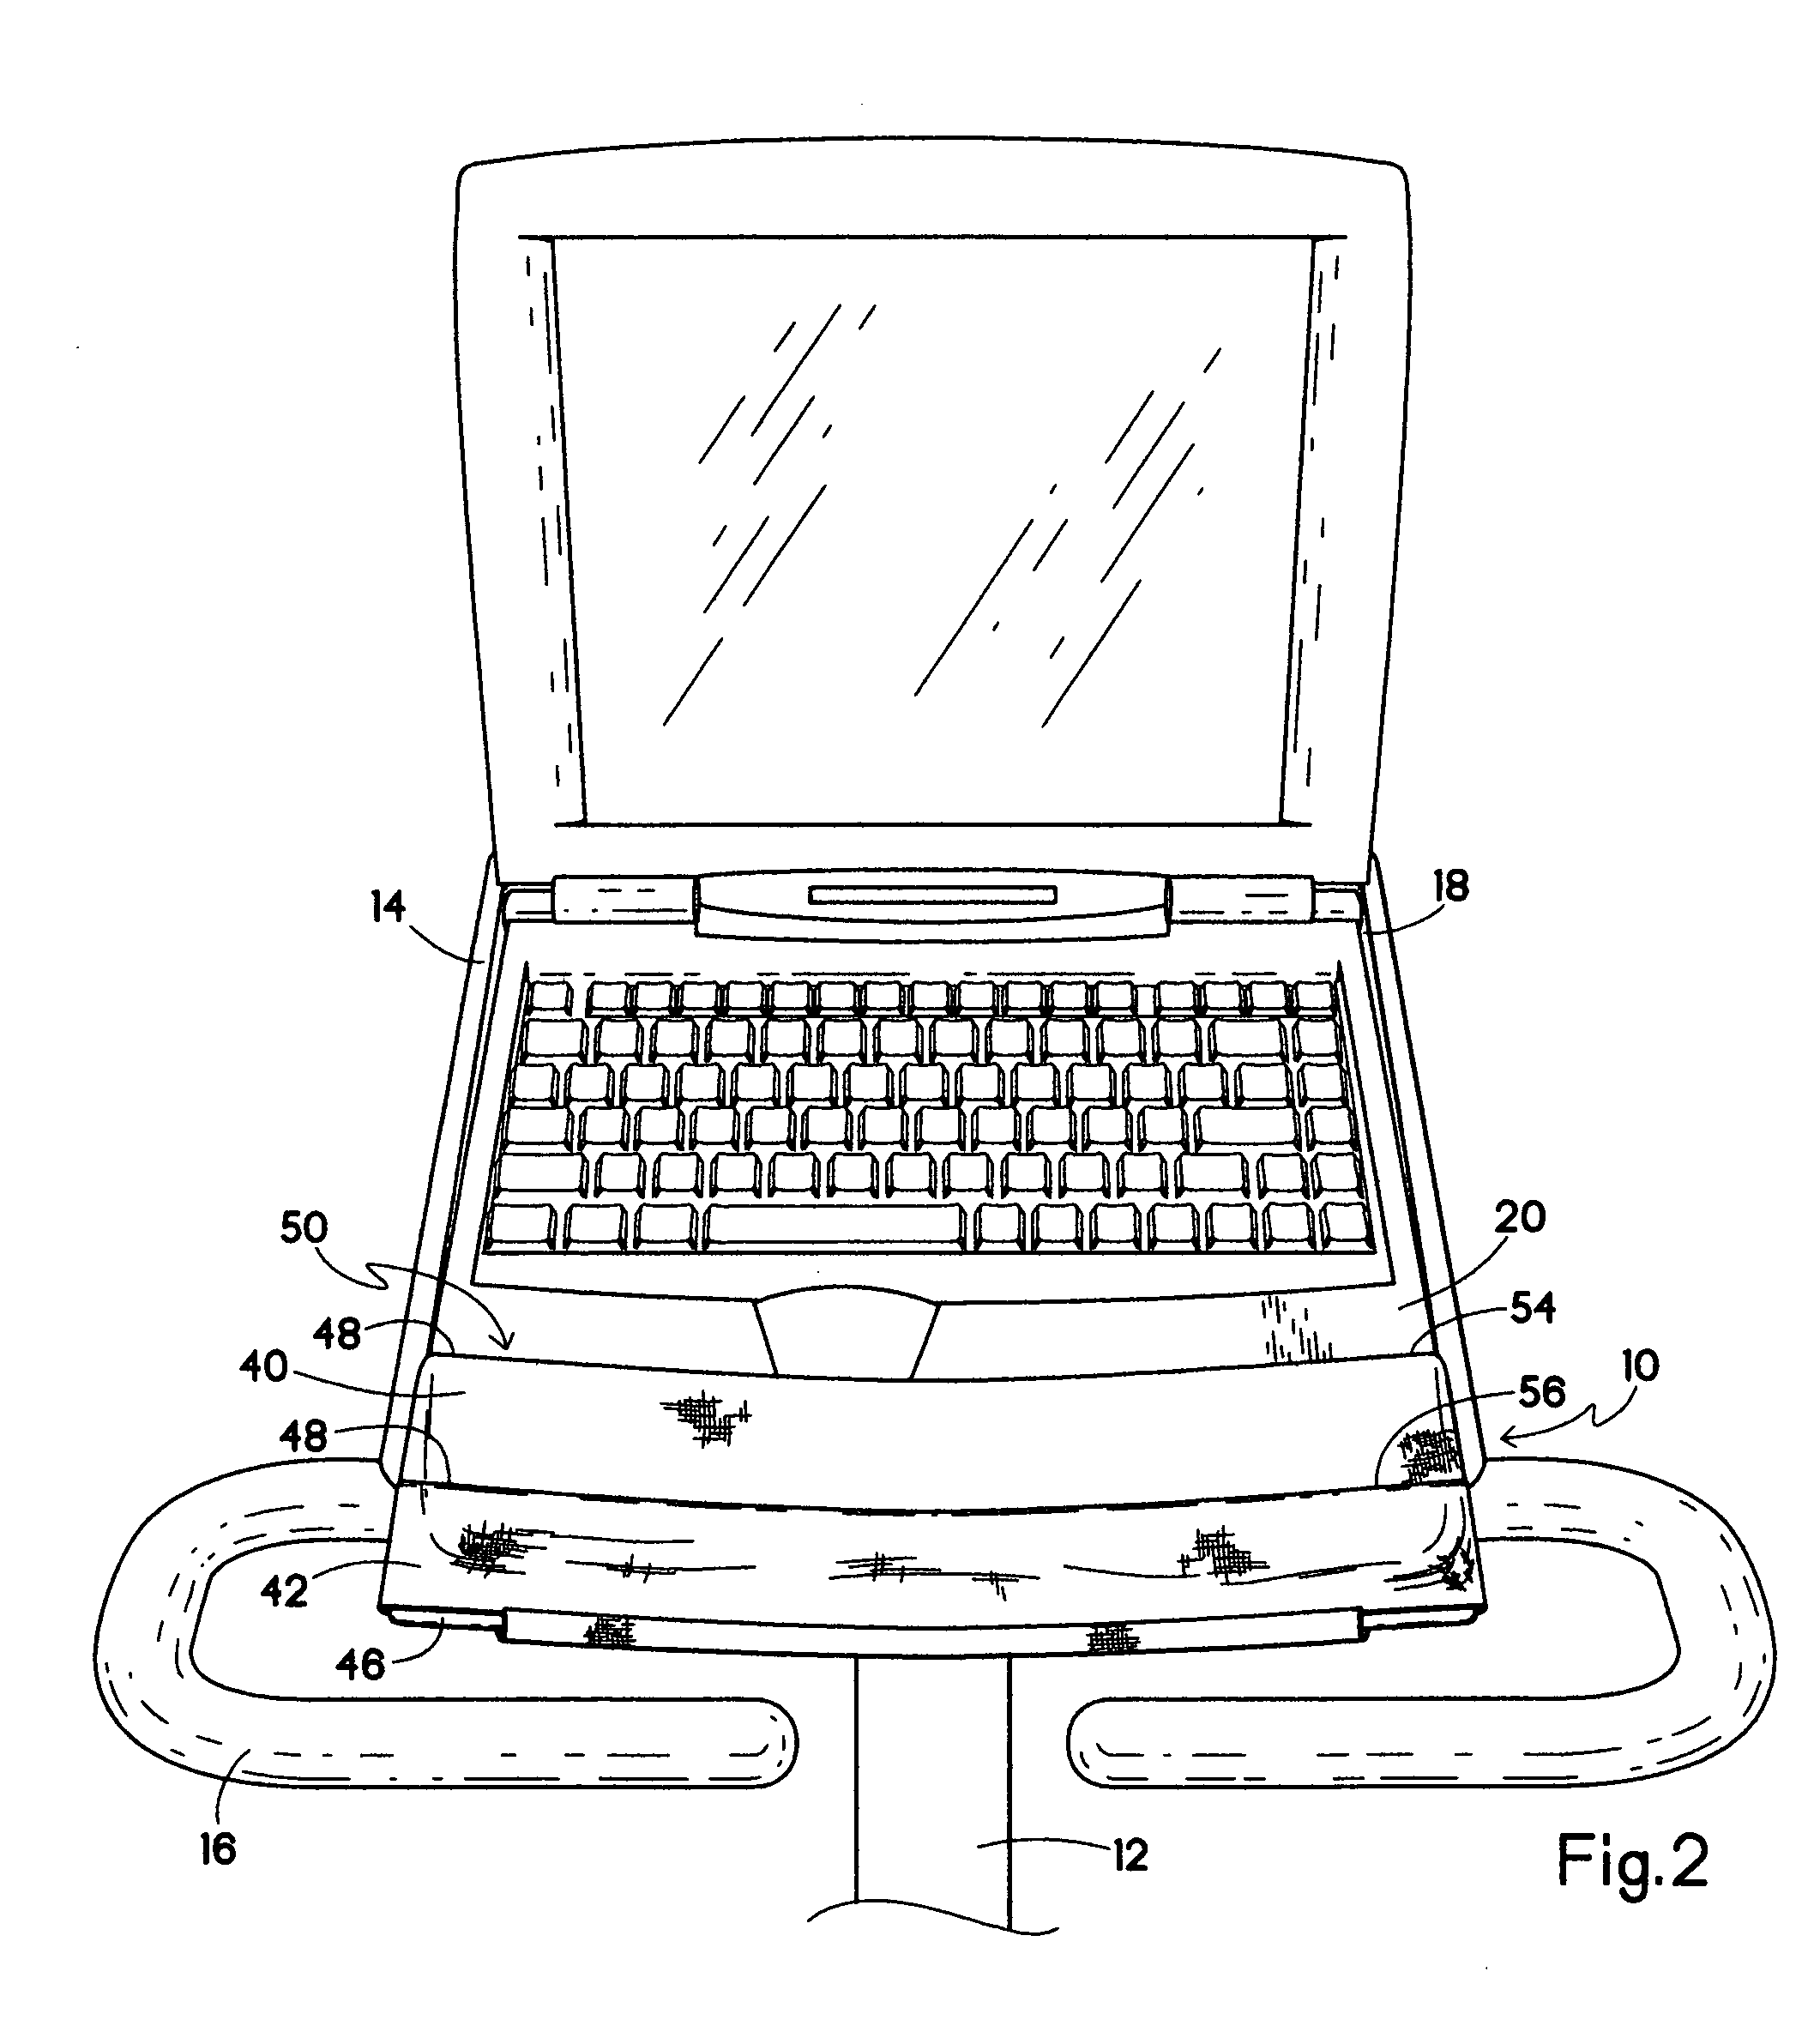 Laptop holder for exercise apparatus